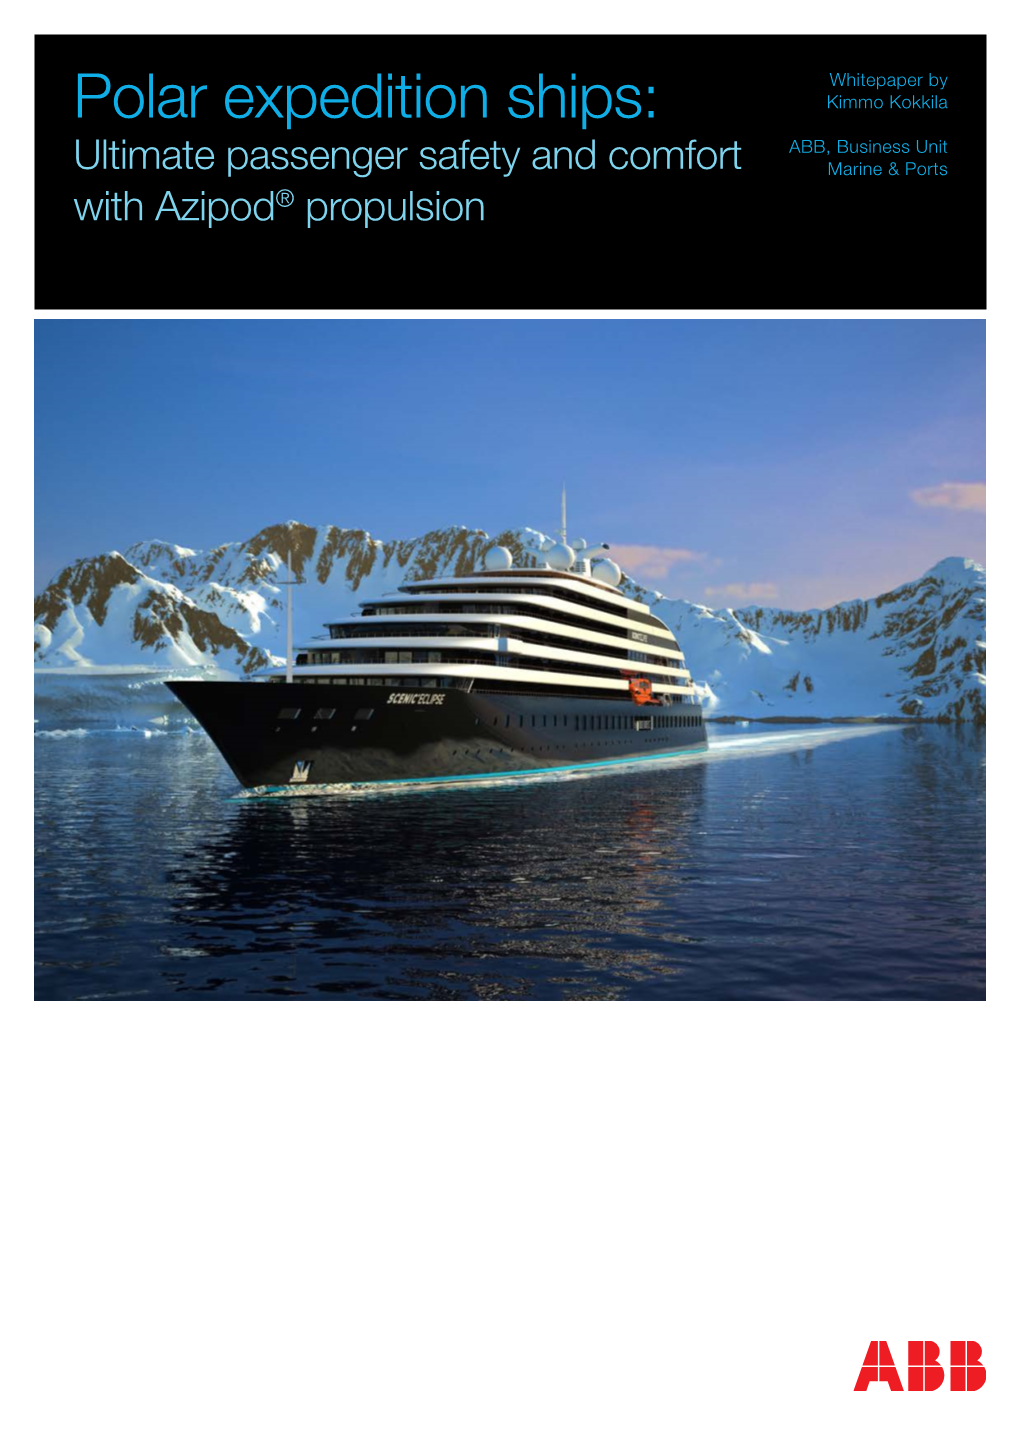 Polar Expedition Ships: Kimmo Kokkila ABB, Business Unit Ultimate Passenger Safety and Comfort Marine & Ports with Azipod® Propulsion Abstract